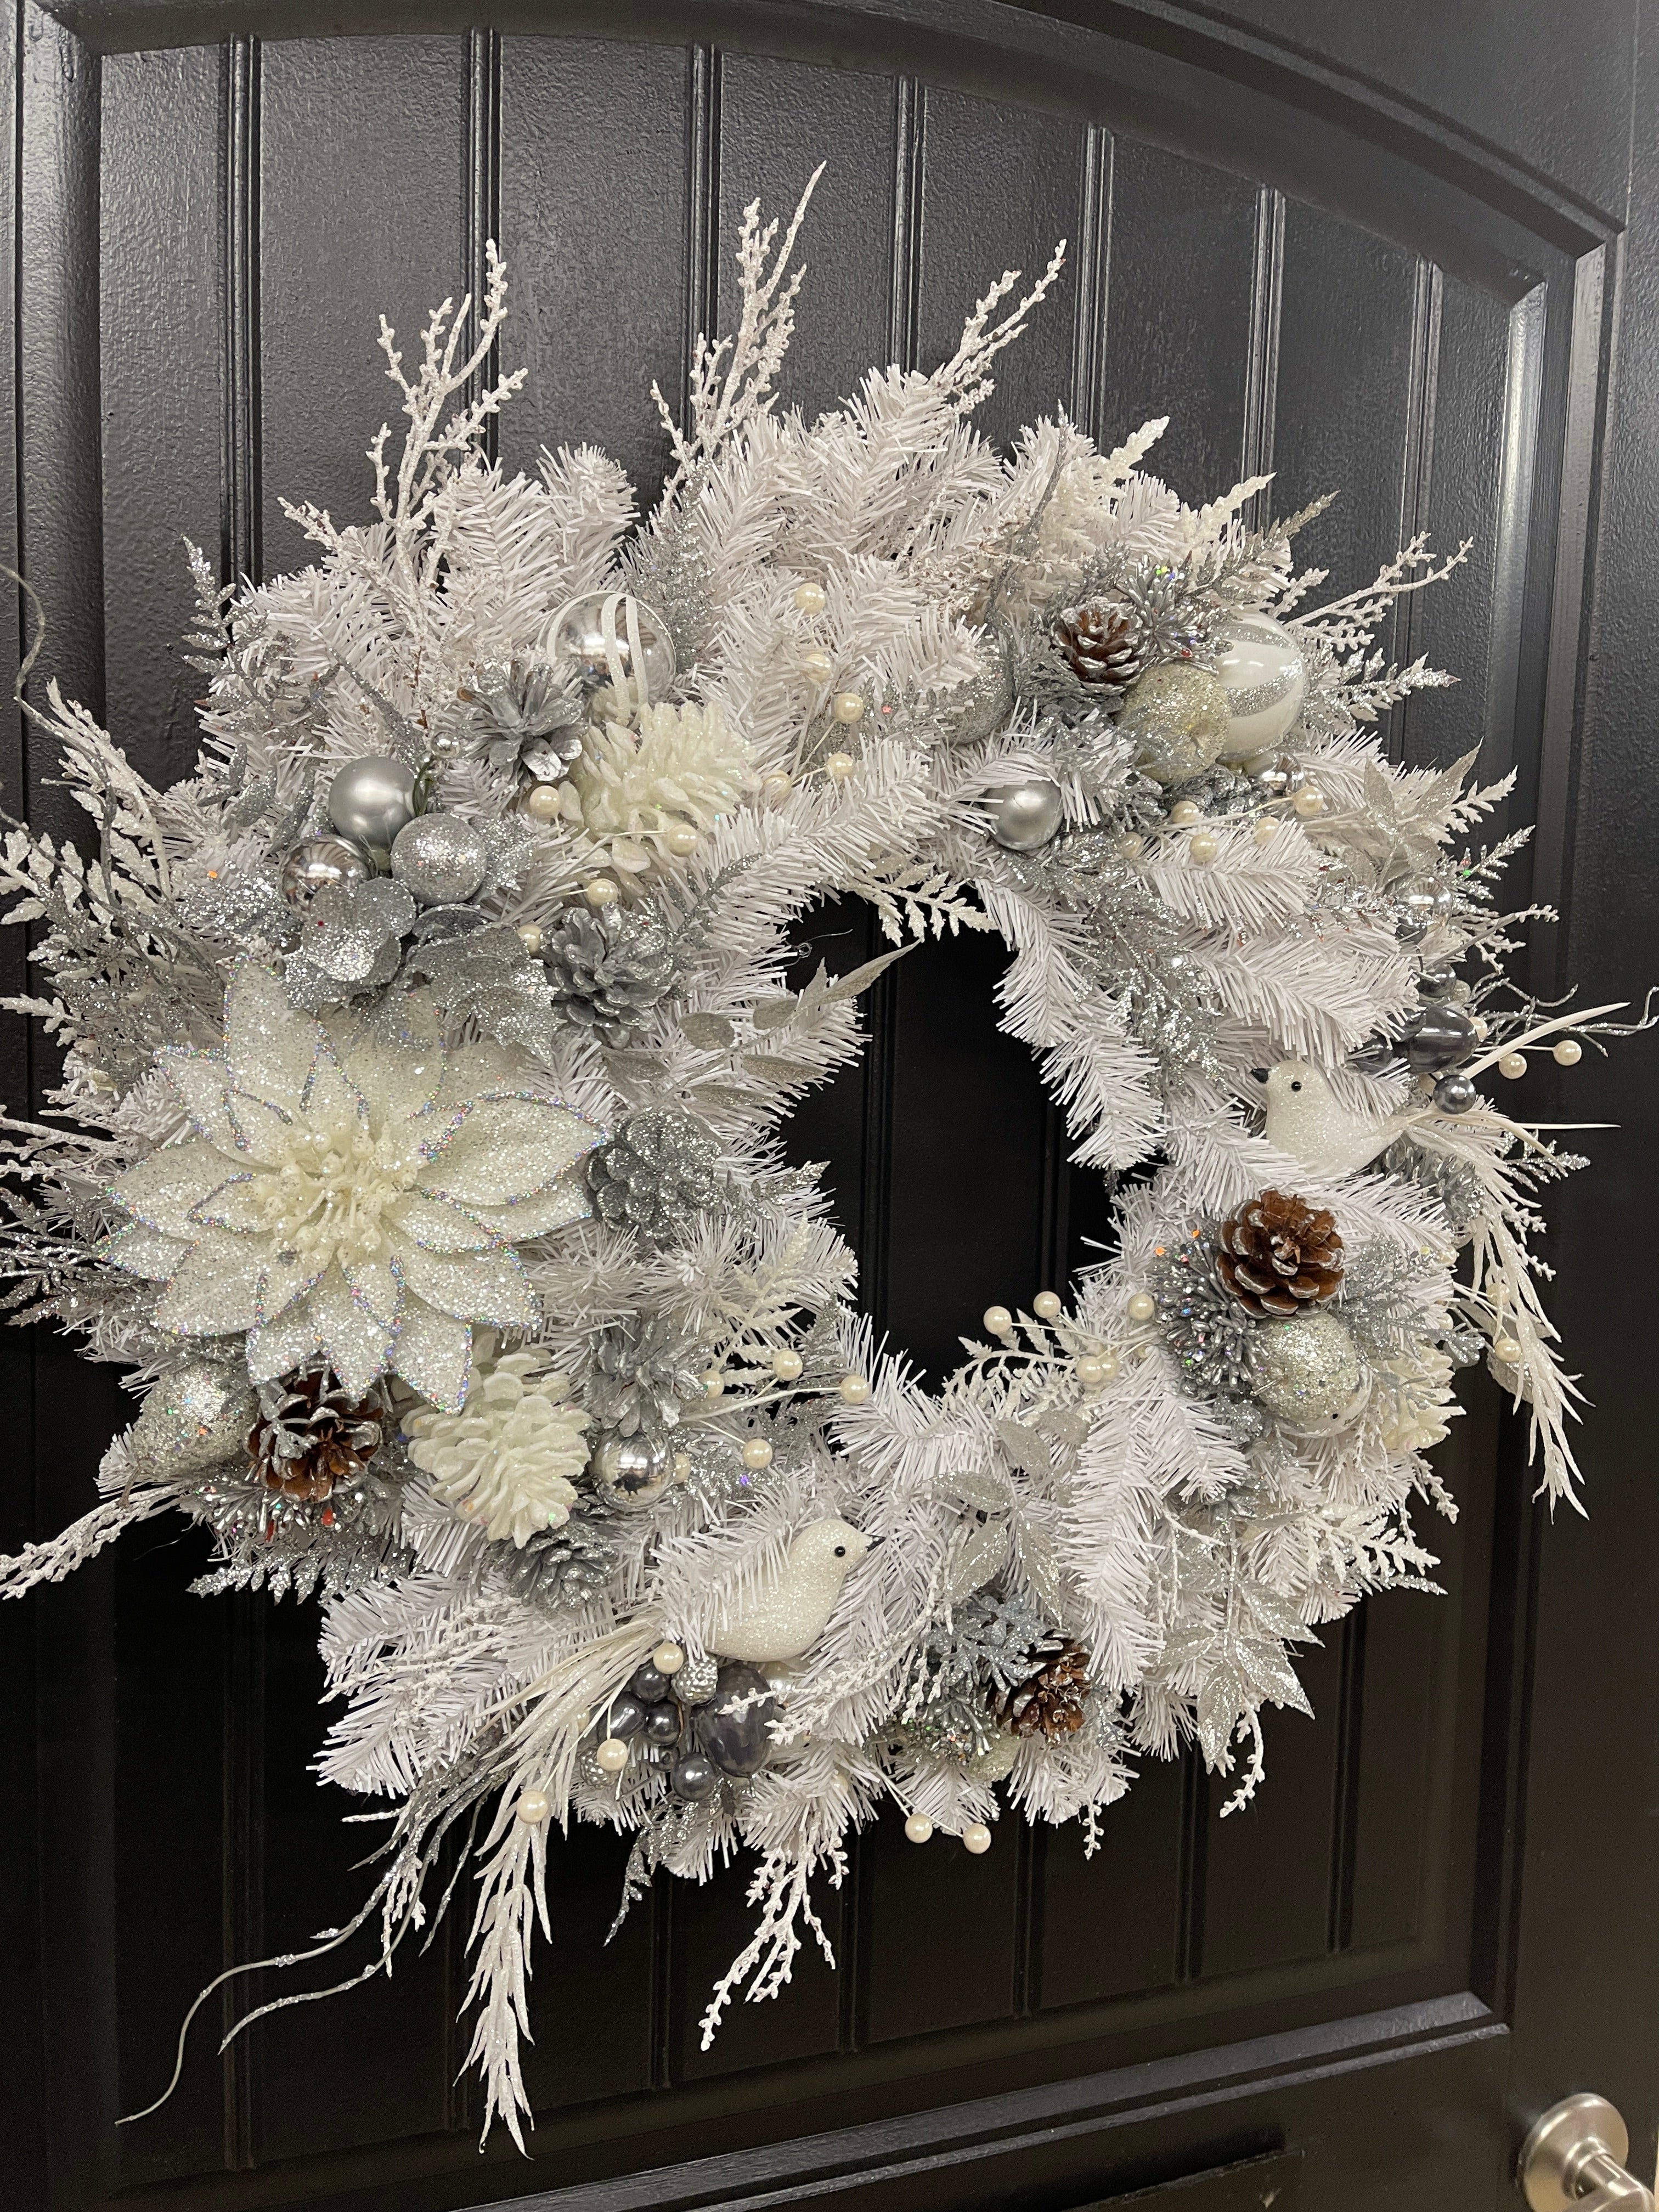 Left Side View of White Evergreen Winter Wreath with White Poinsettias, Frosted Pine Cones, Christmas Balls of Silver, White and Gray, along with Silver Glittered Fern and Snow Covered Twigs and 2 White Doves on a Black Door